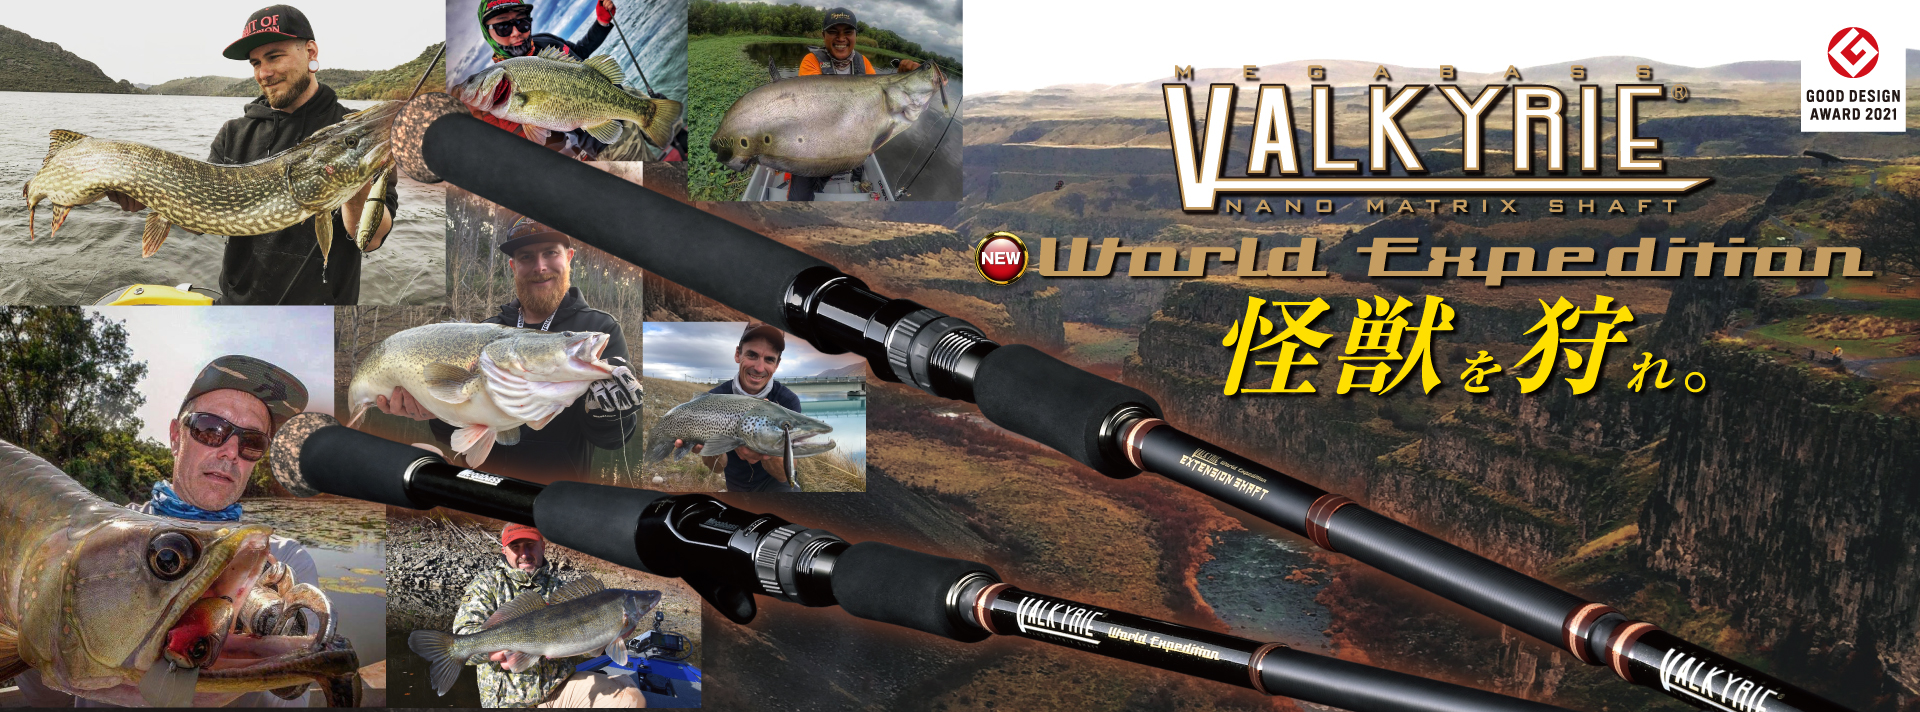 VALKYRIE World Expedition | FRESHWATER | Megabass-メガバス